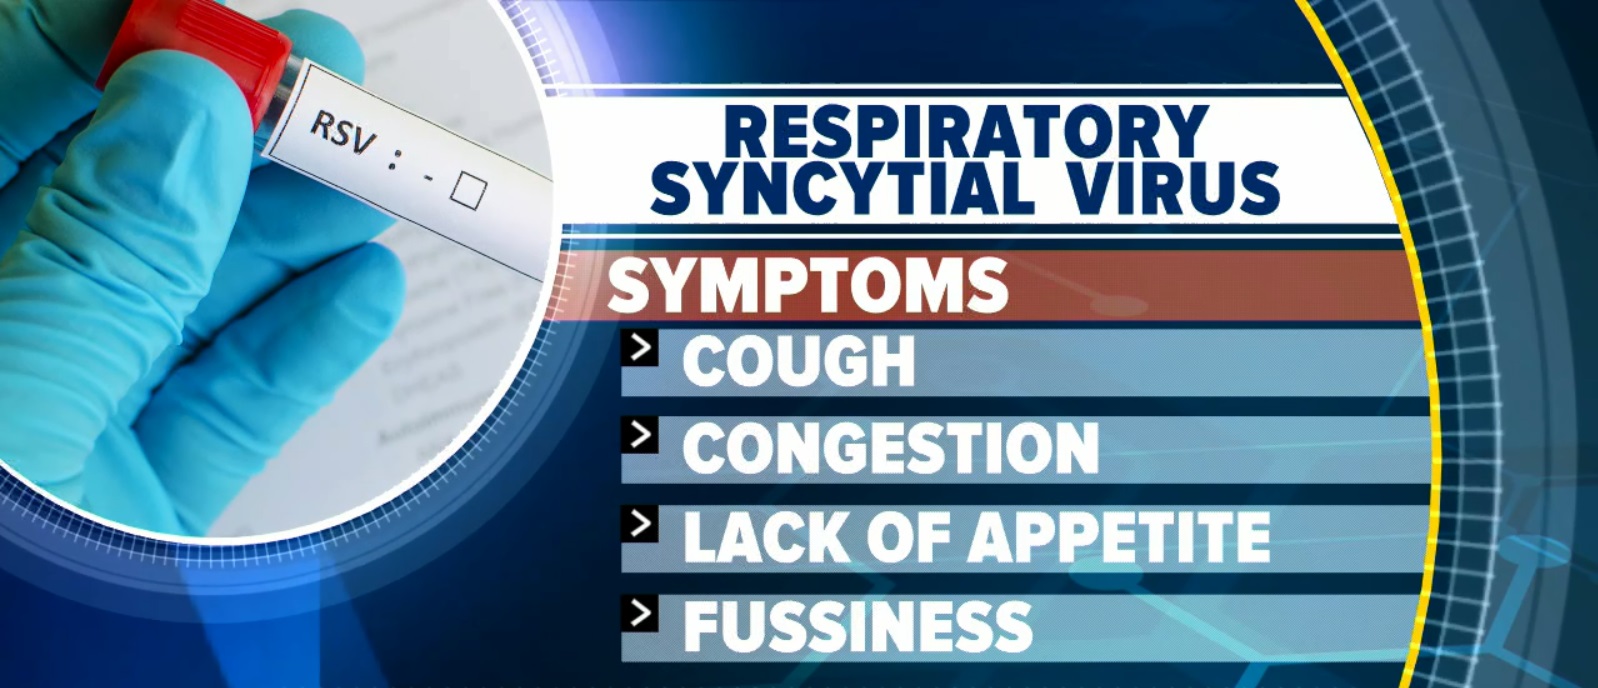 PHOTO: Dr. Jennifer Ashton, chief medical correspondent for ABC News, said RSV first appears like the common cold and symptoms are based on age.